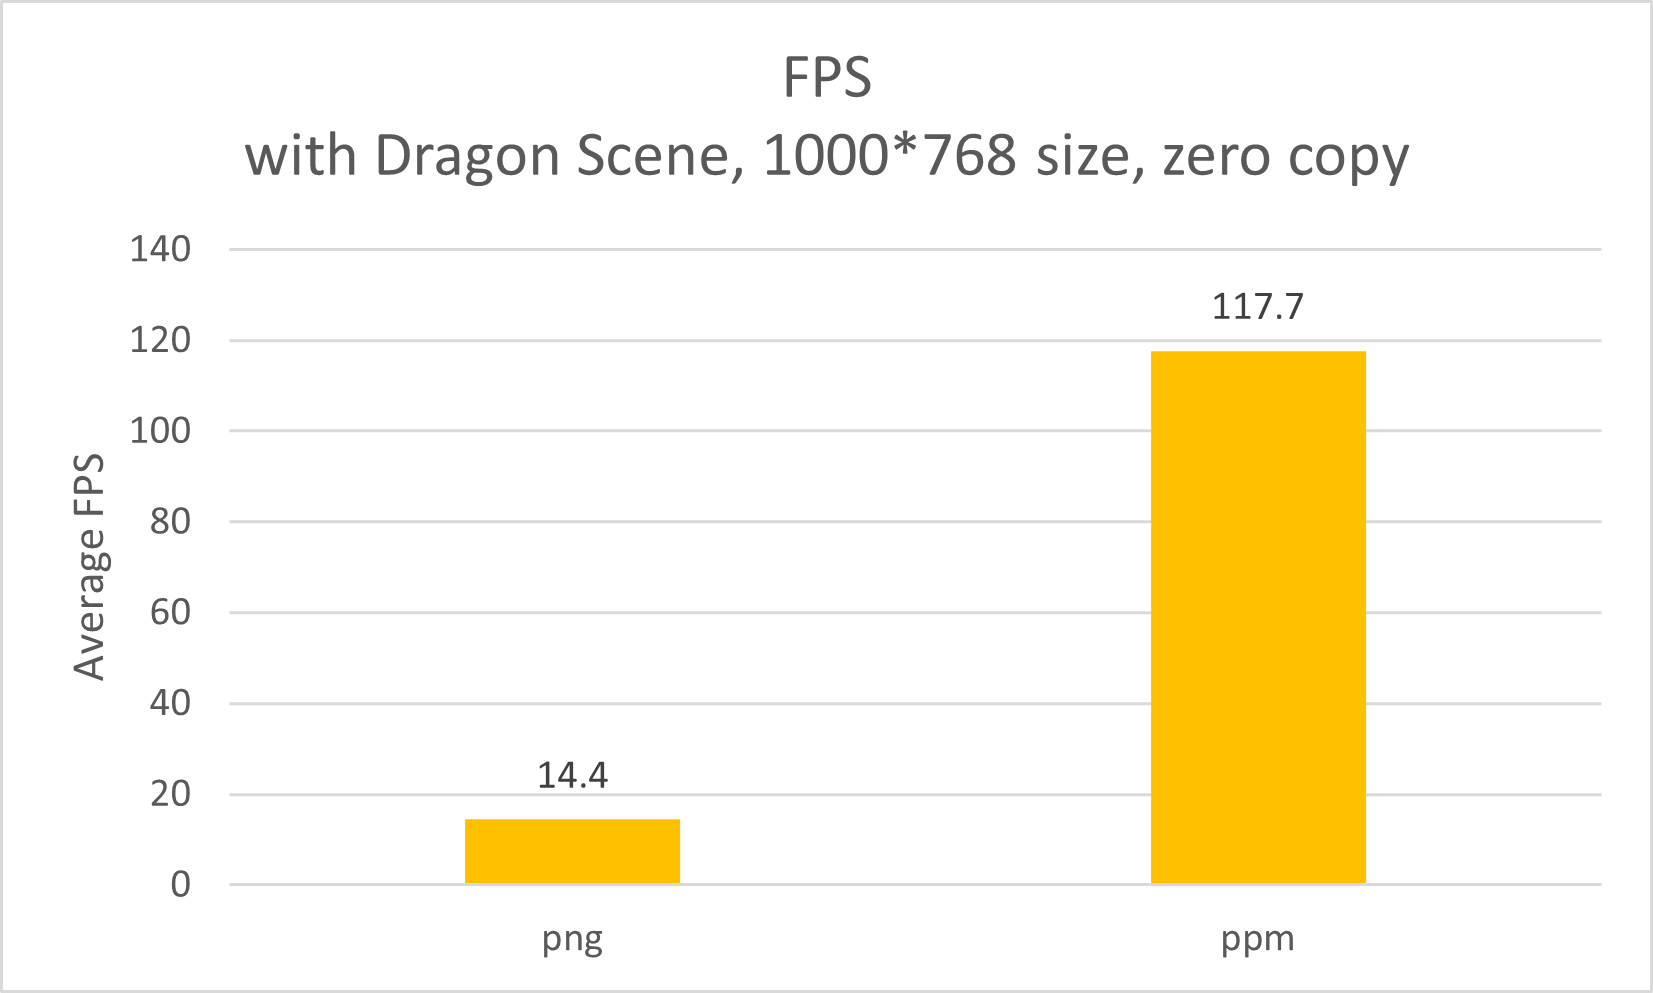 fps_ppm.png